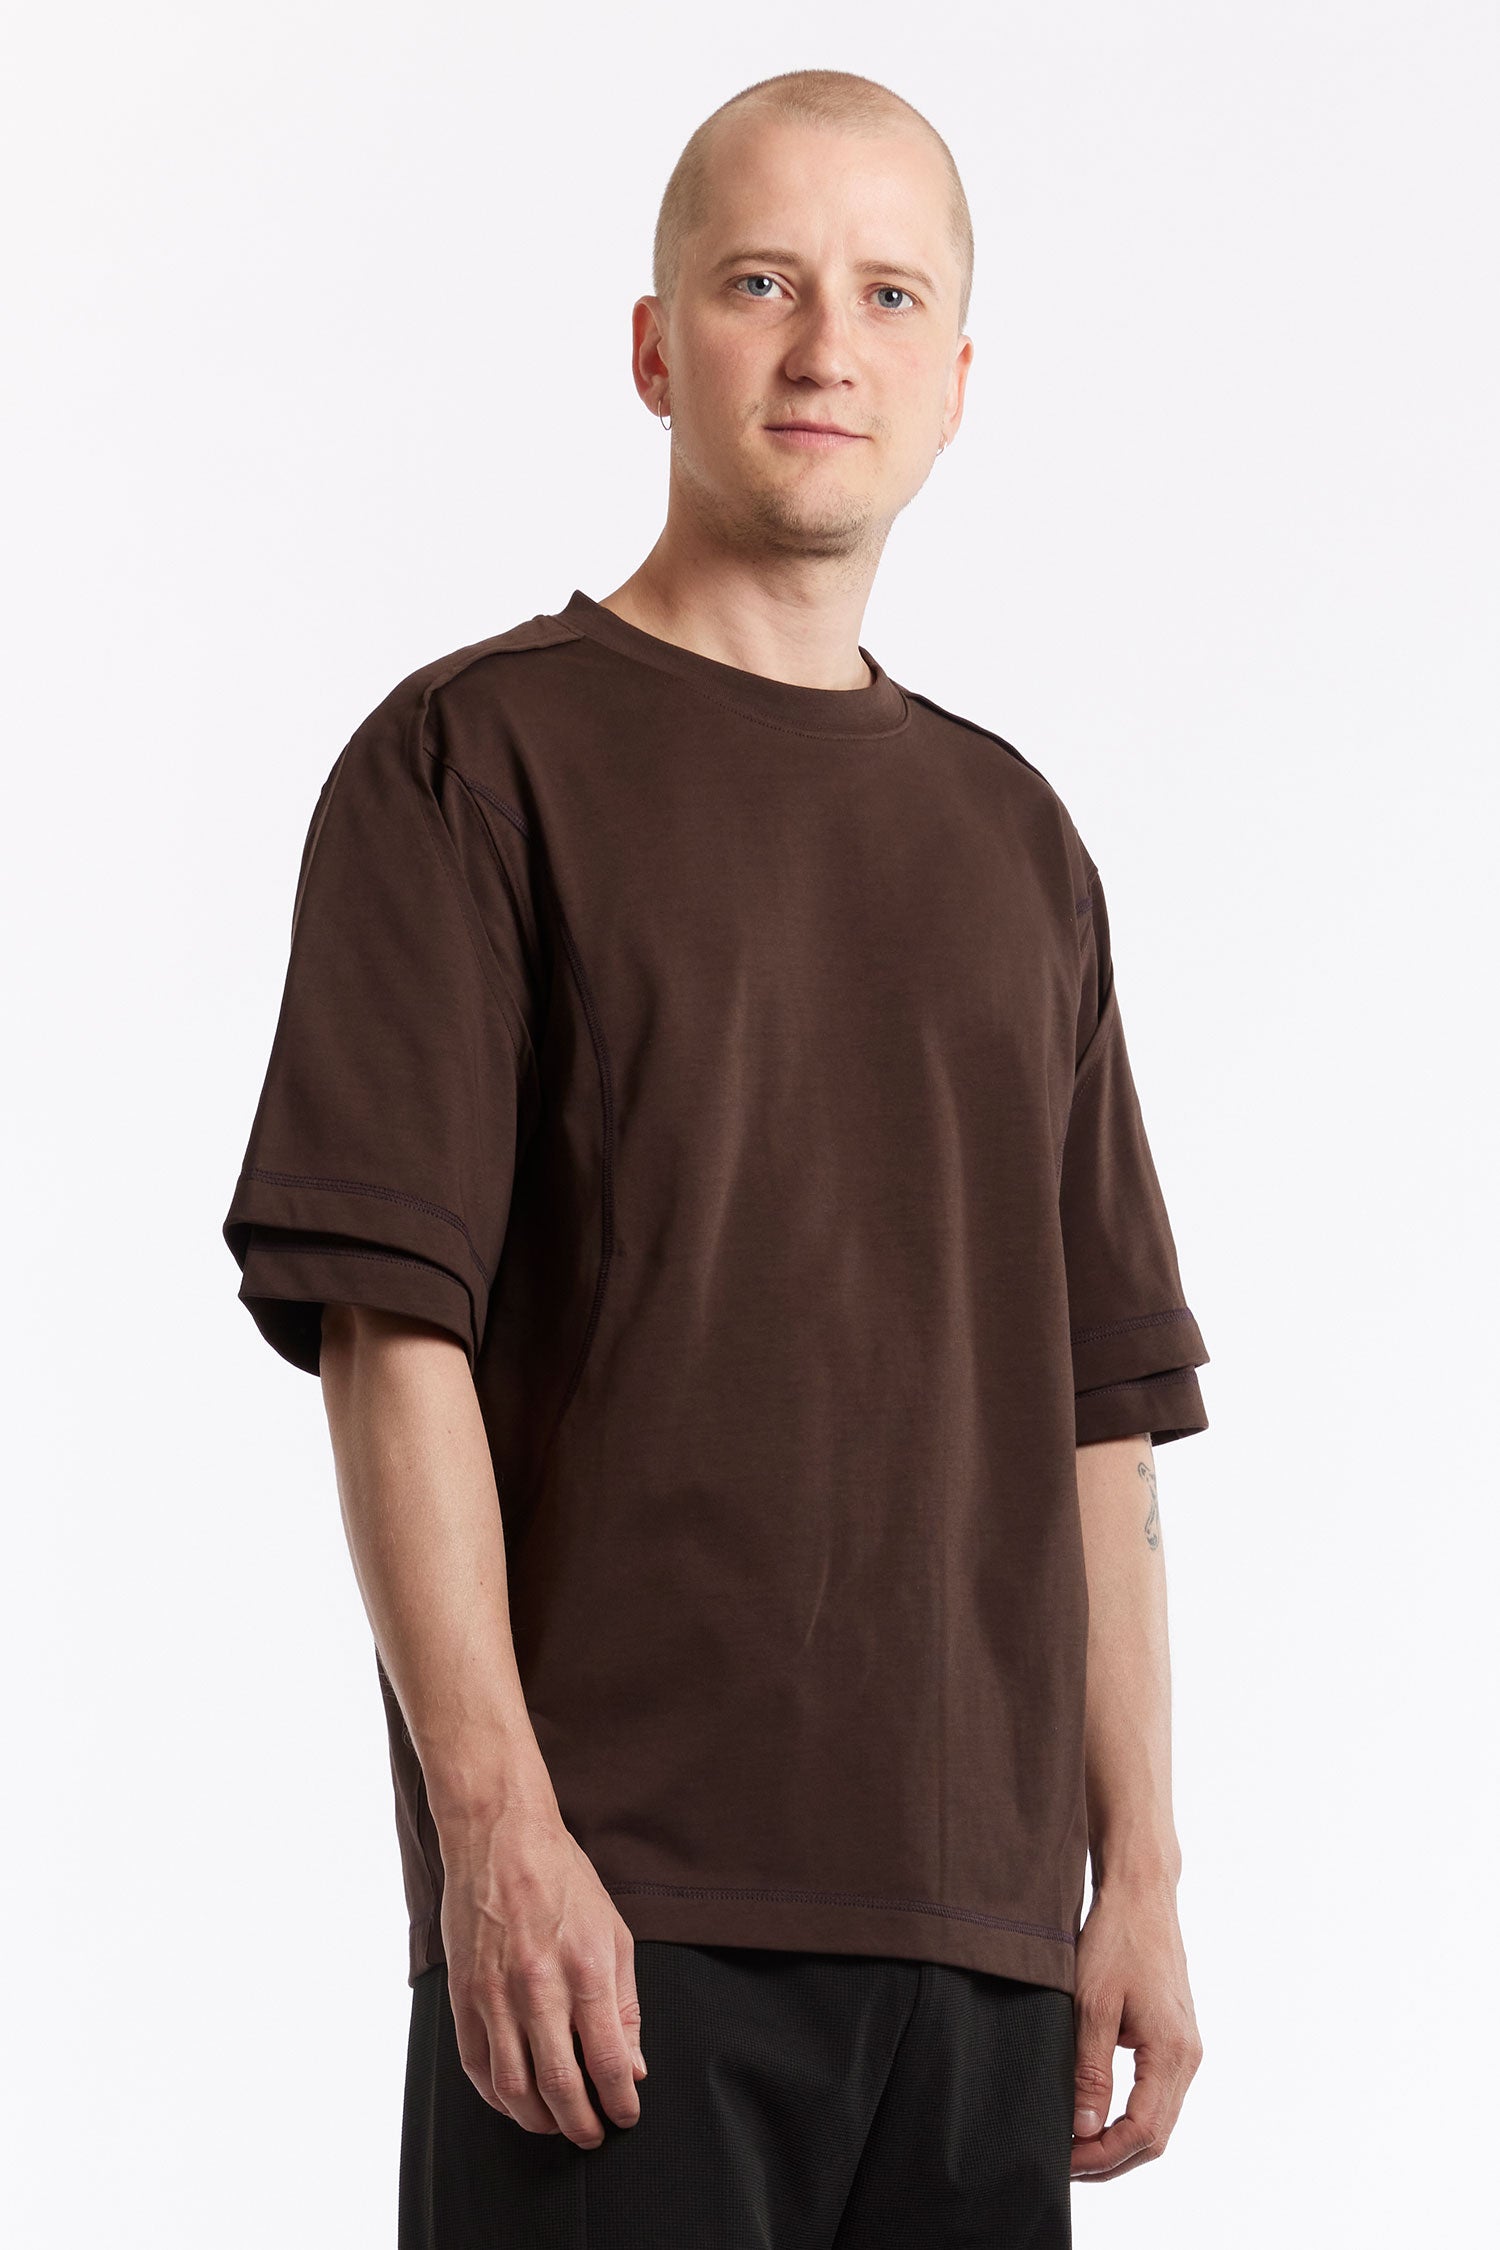 The AFFXWRKS - DUAL SLEEVE SS TEE SHALE BROWN available online with global shipping, and in PAM Stores Melbourne and Sydney.